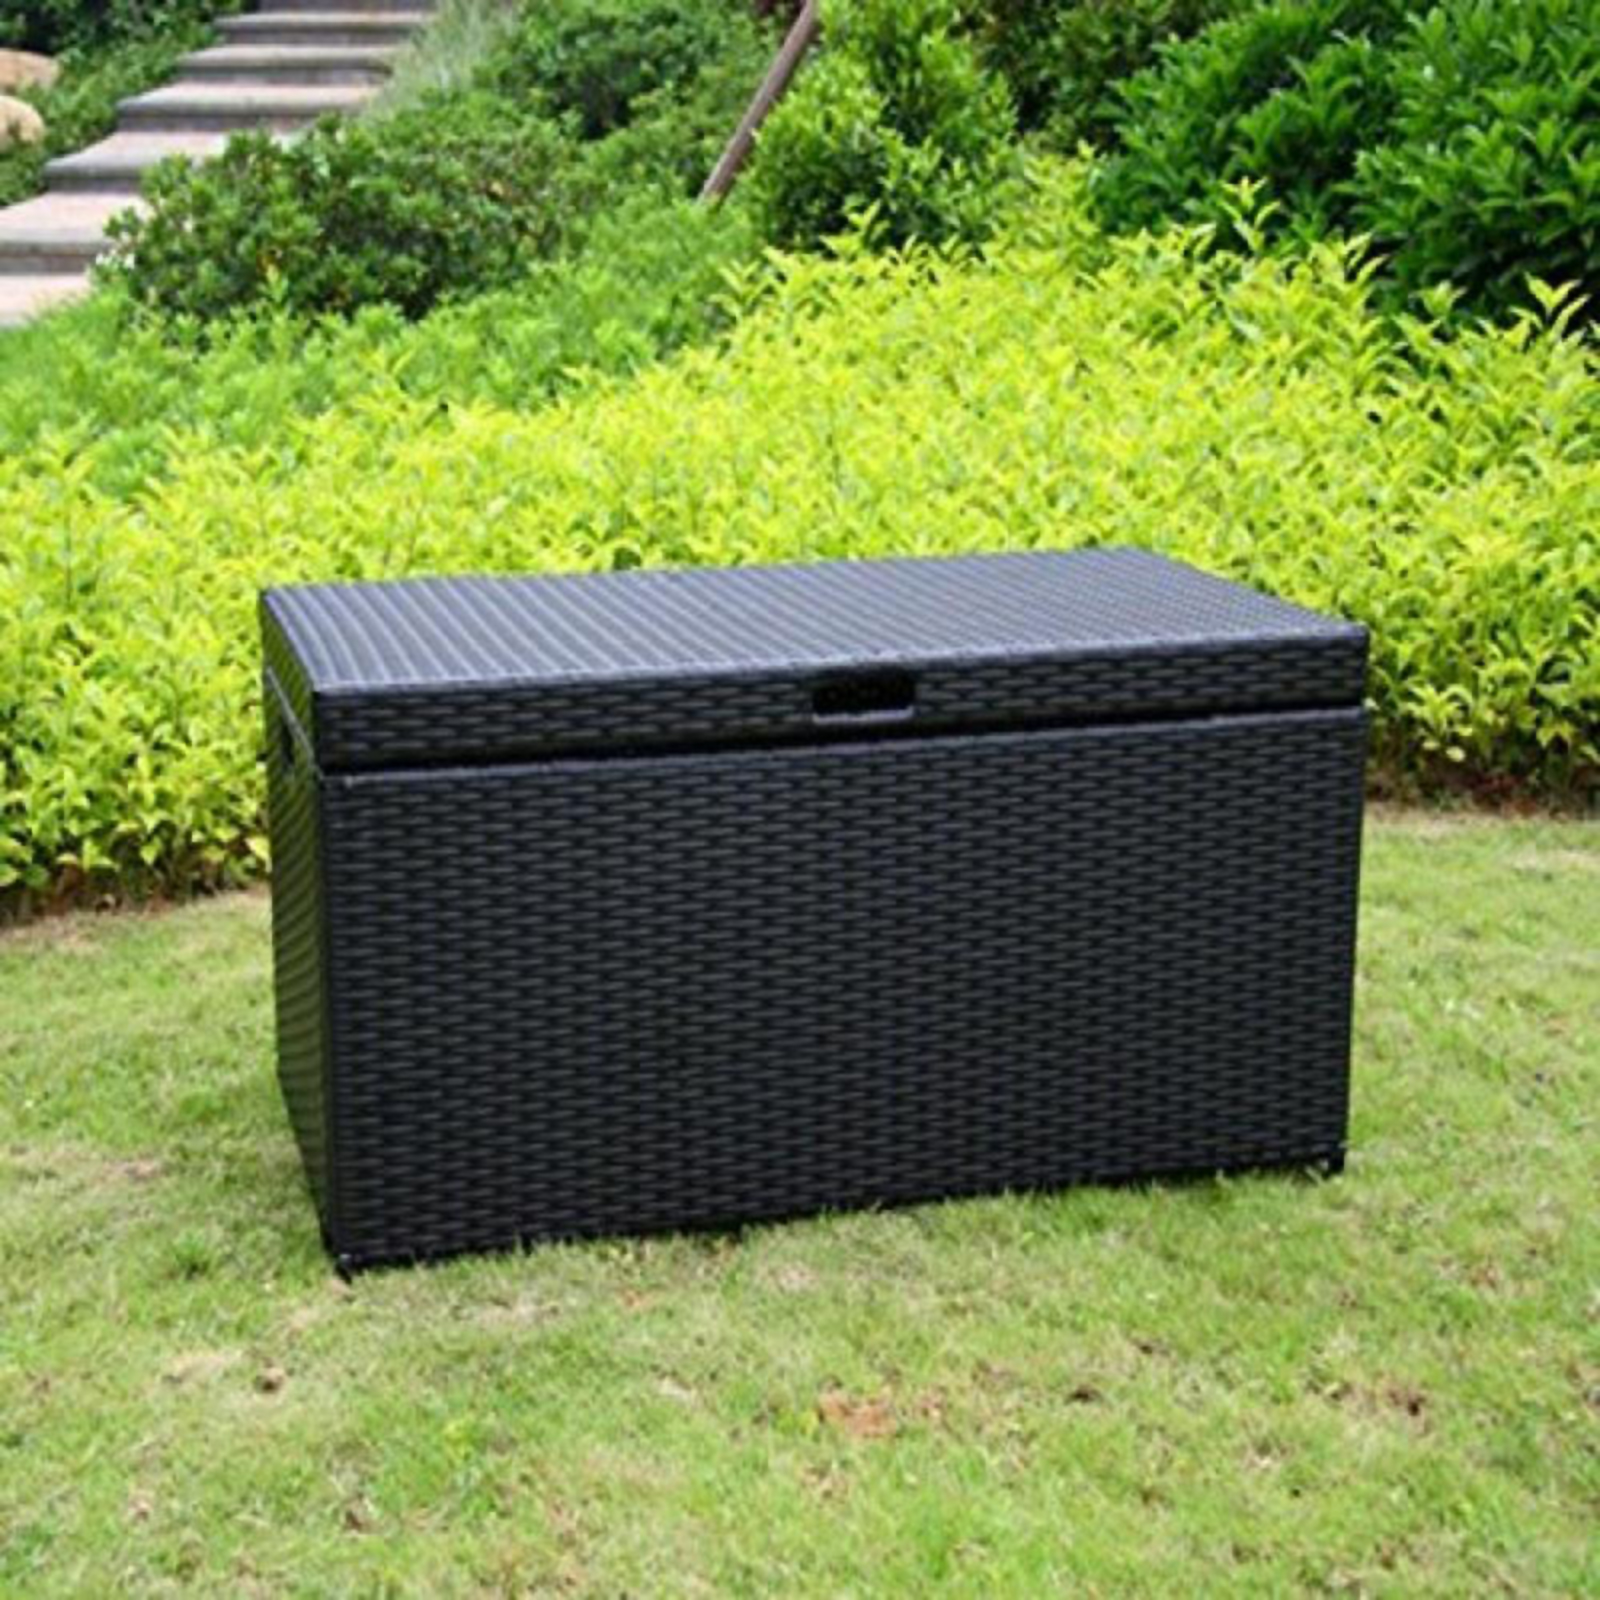 CC Outdoor Living Resin Wicker Outdoor Hinged Storage Deck Box with Lid - Black